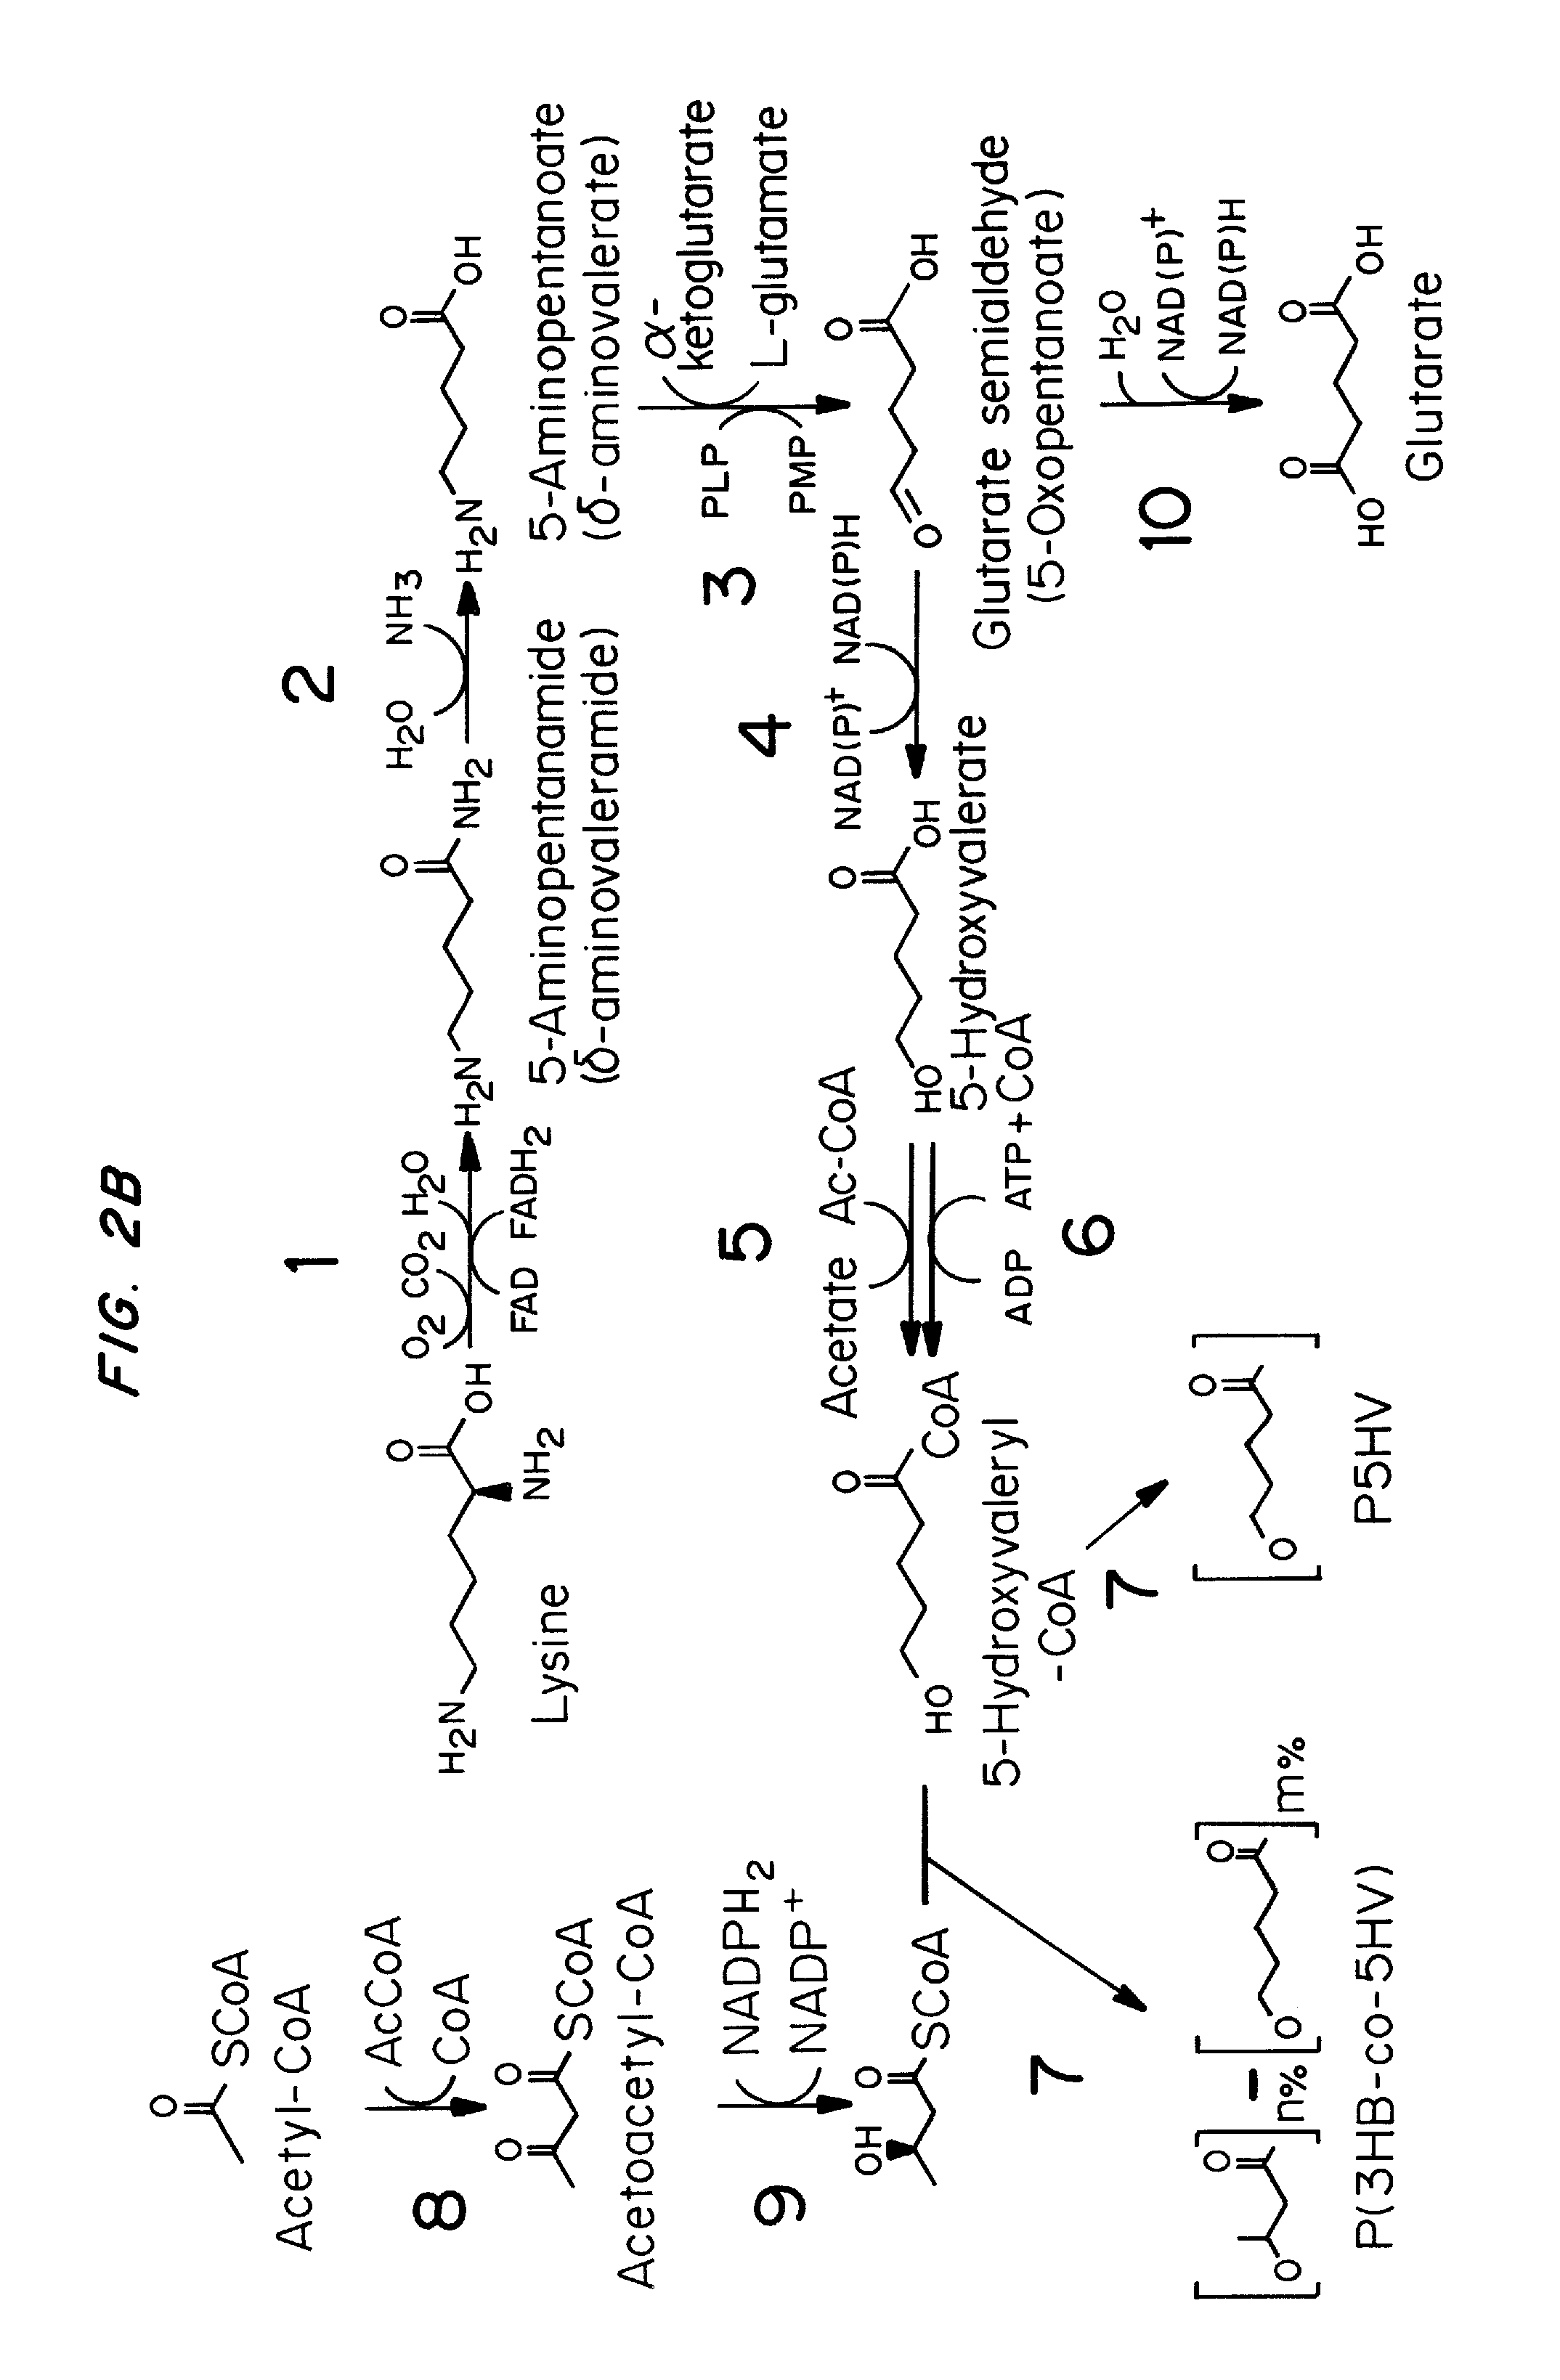 Green process and compositions for producing poly(5HV) and 5 carbon chemicals